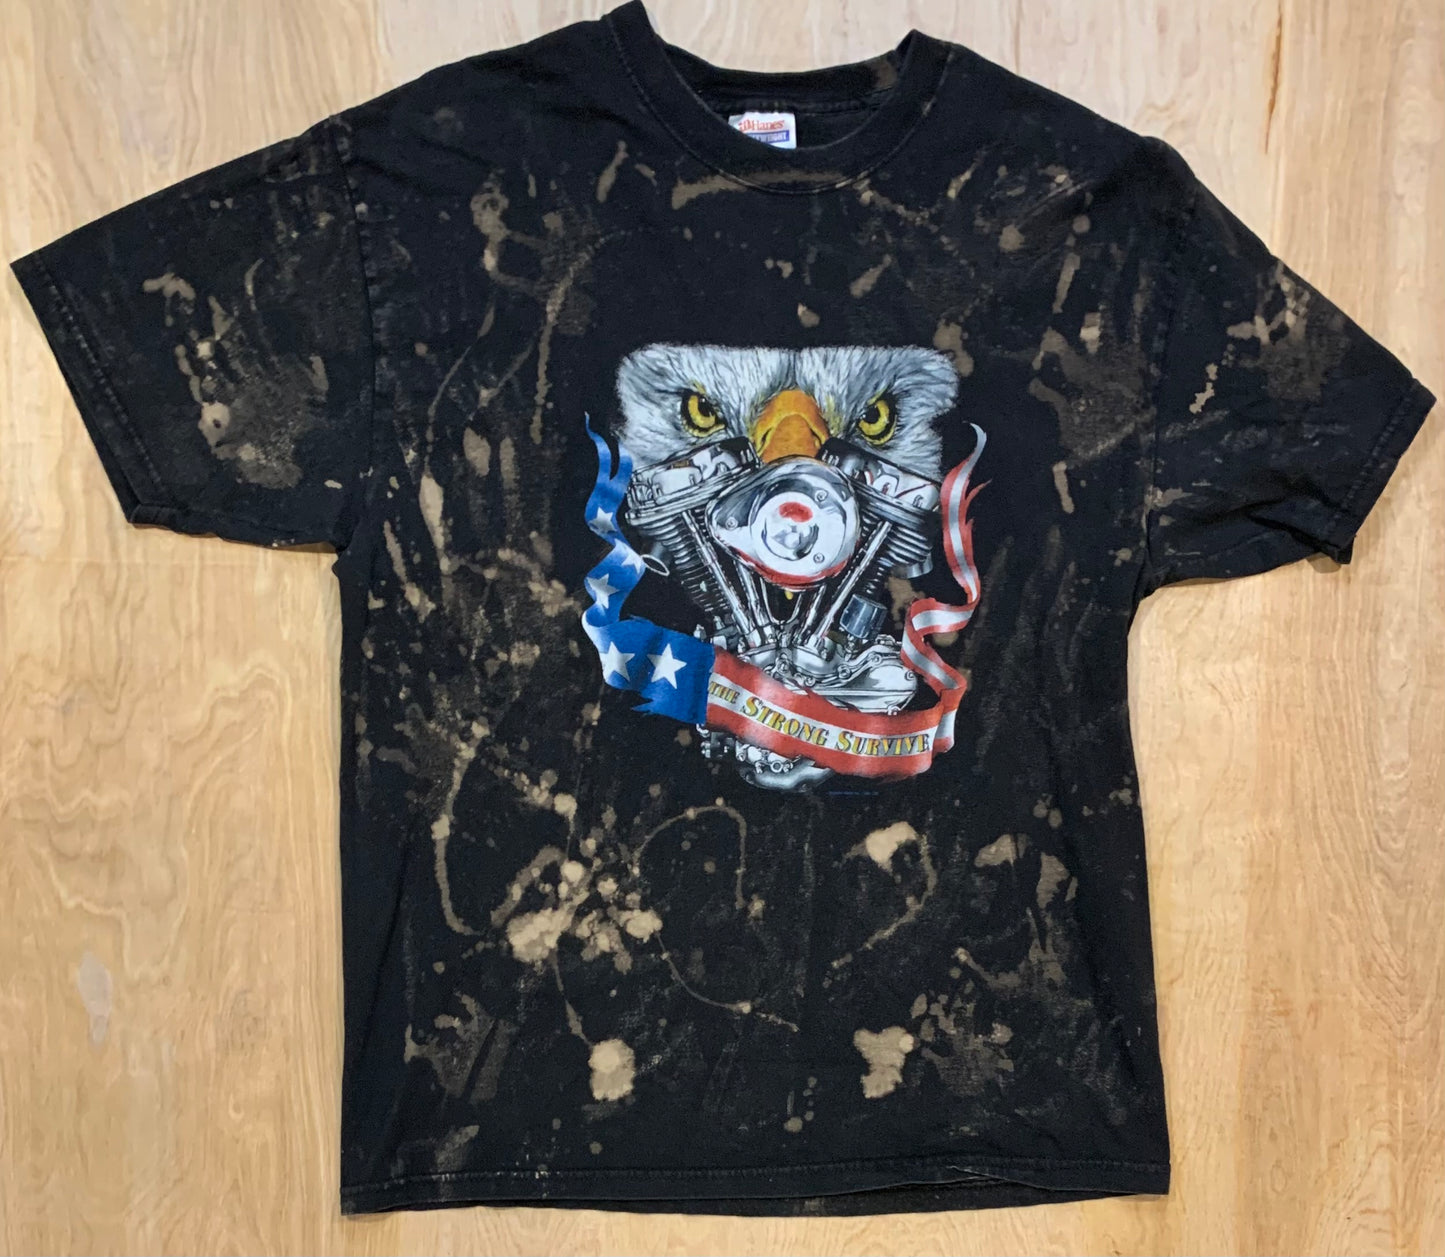 90's "The Strong Survive" Graphic T-shirt